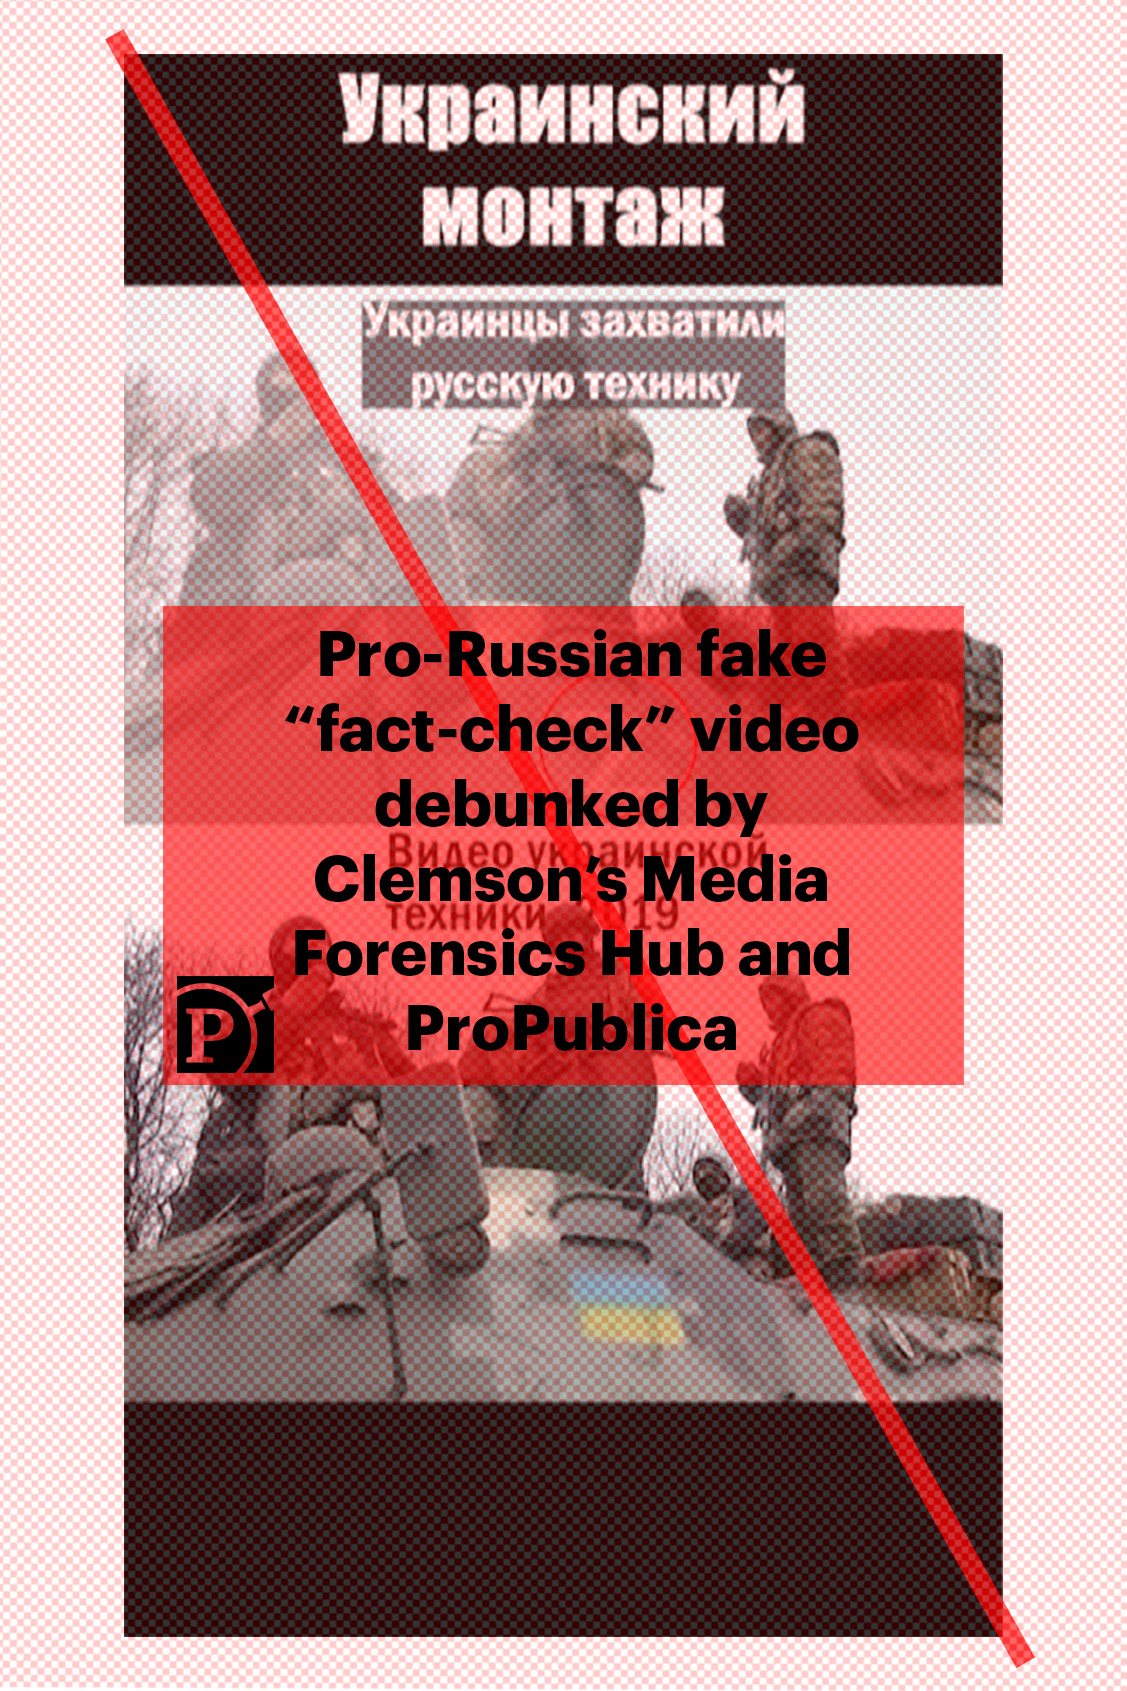 Stills from a Russian-language video that falsely claims to fact-check Ukrainian disinformation. There’s no evidence the video was created by Ukrainian media or circulated anywhere, but the label at the top says the video is a “Ukrainian edit.” The top caption inaccurately labels the footage as “Ukrainians captured Russian equipment.” The lower caption correctly identifies the event as “Video of Ukrainian equipment 2019.” Screenshot by ProPublica